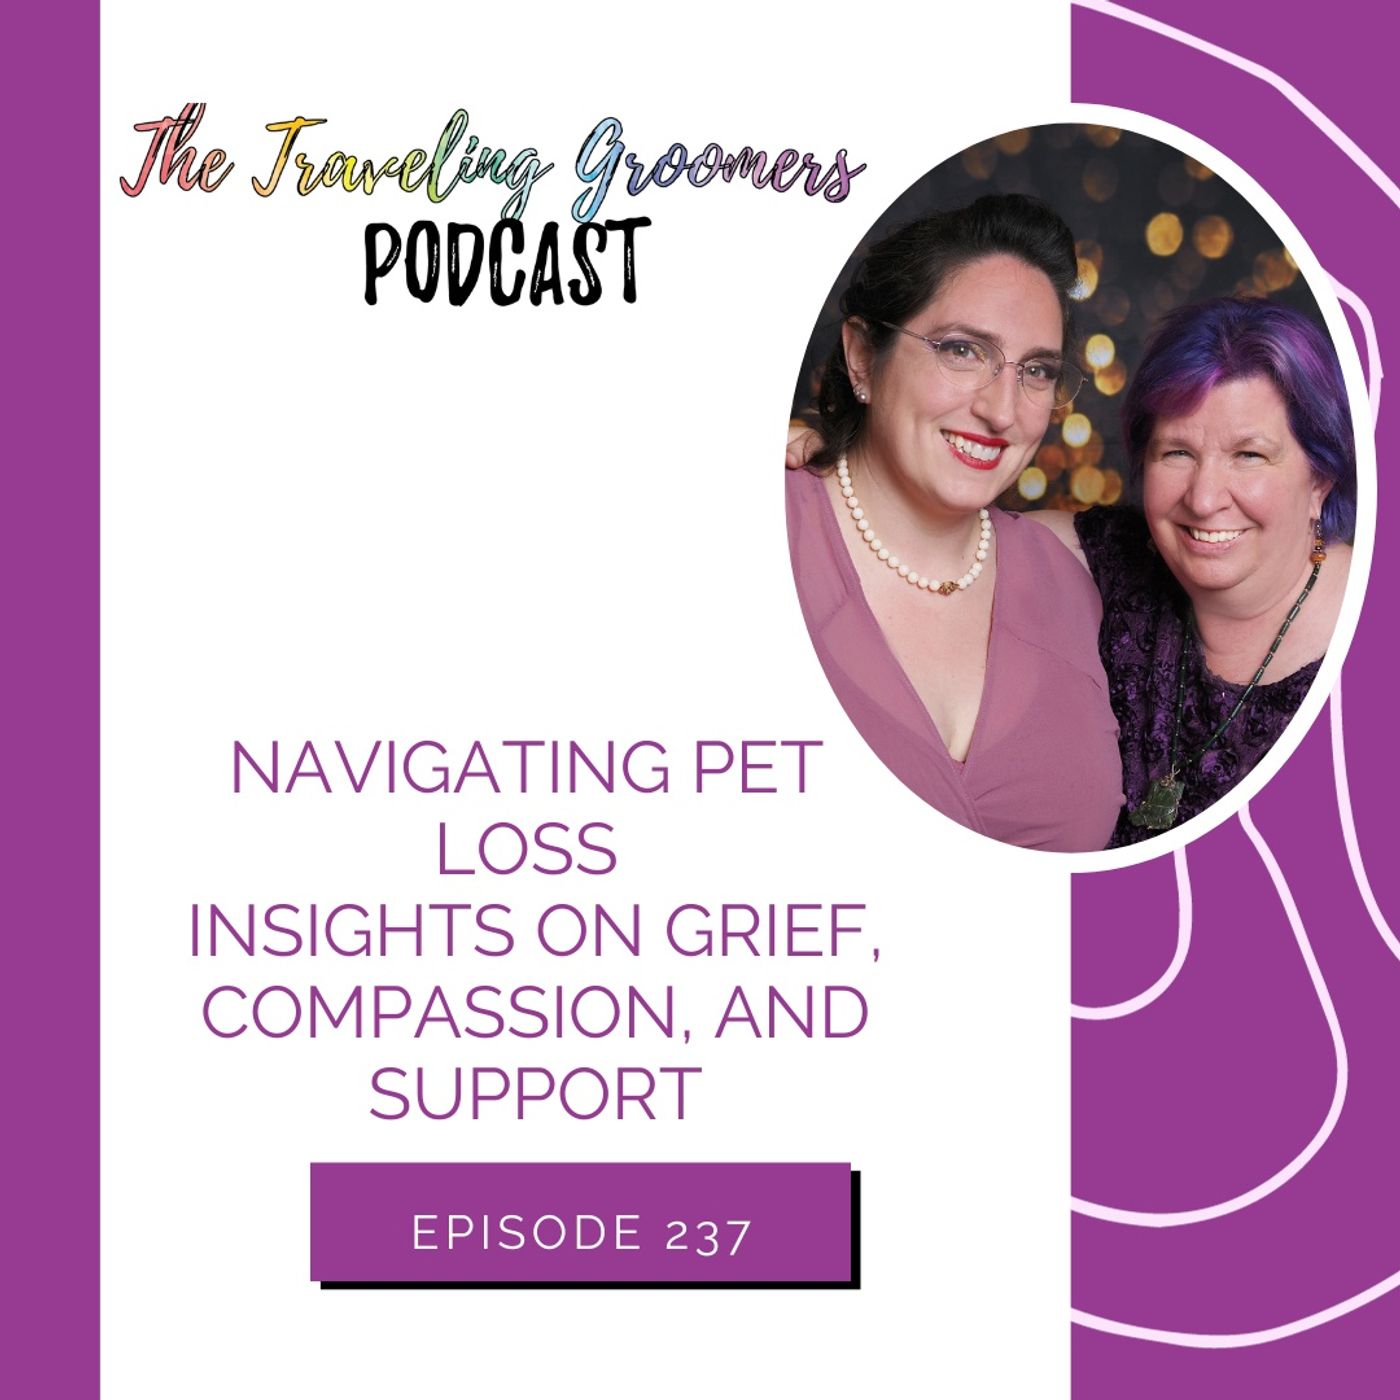 Navigating Pet Loss Insights on Grief, Compassion, and Support